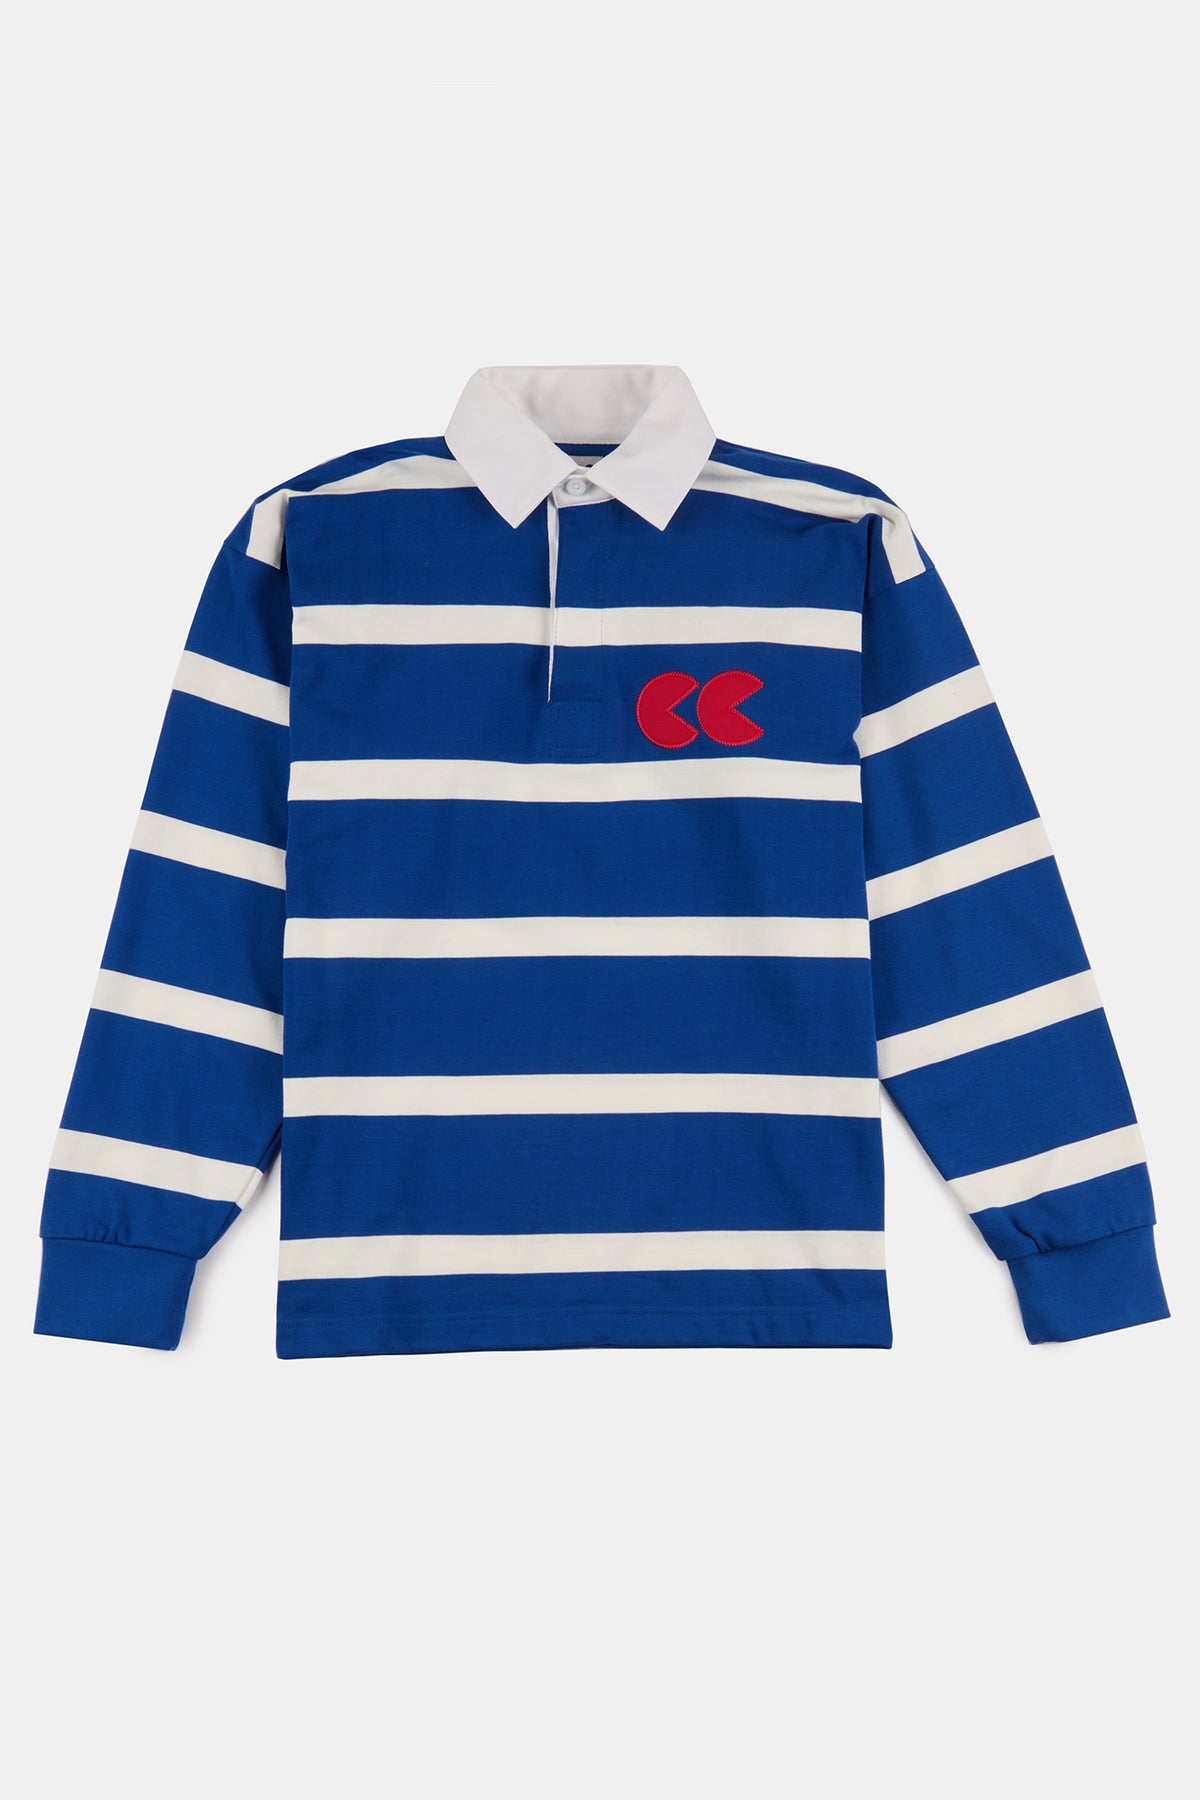 
            Flatlay product shot of men&#39;s stripe rugby shirt in blue and white with red CC logo